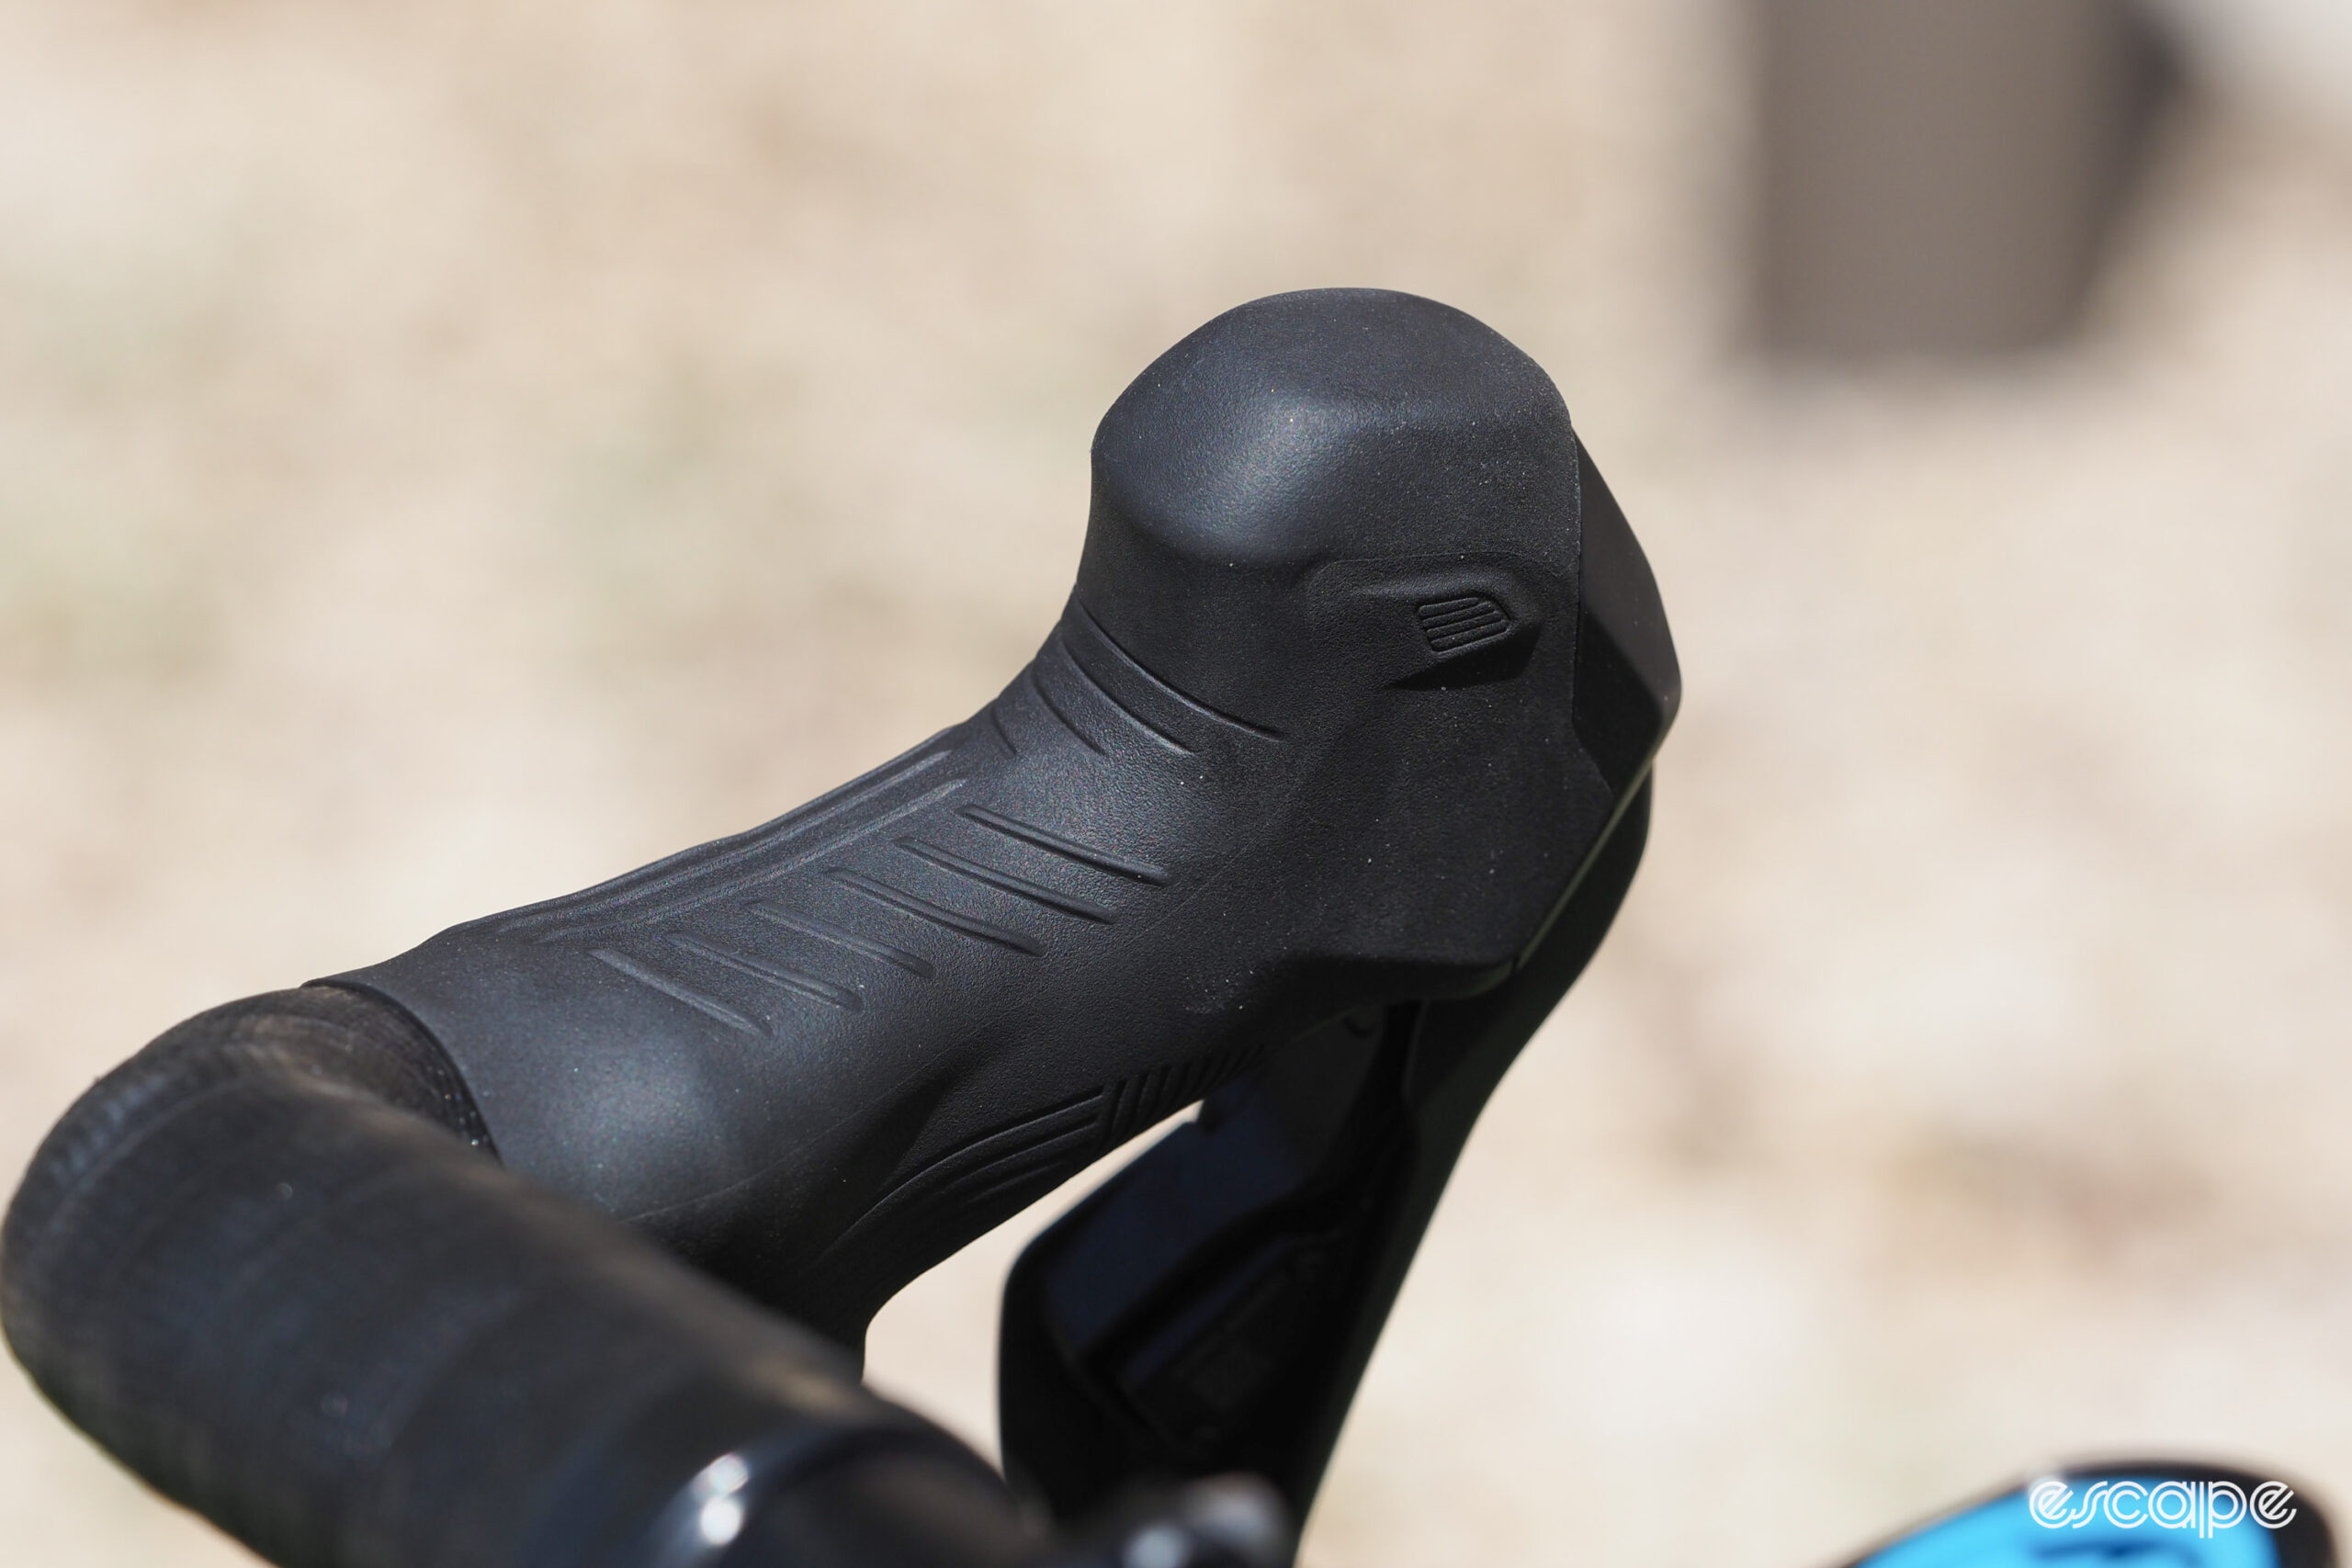 Shimano GRX Di2 RX825 auxiliary shift buttons